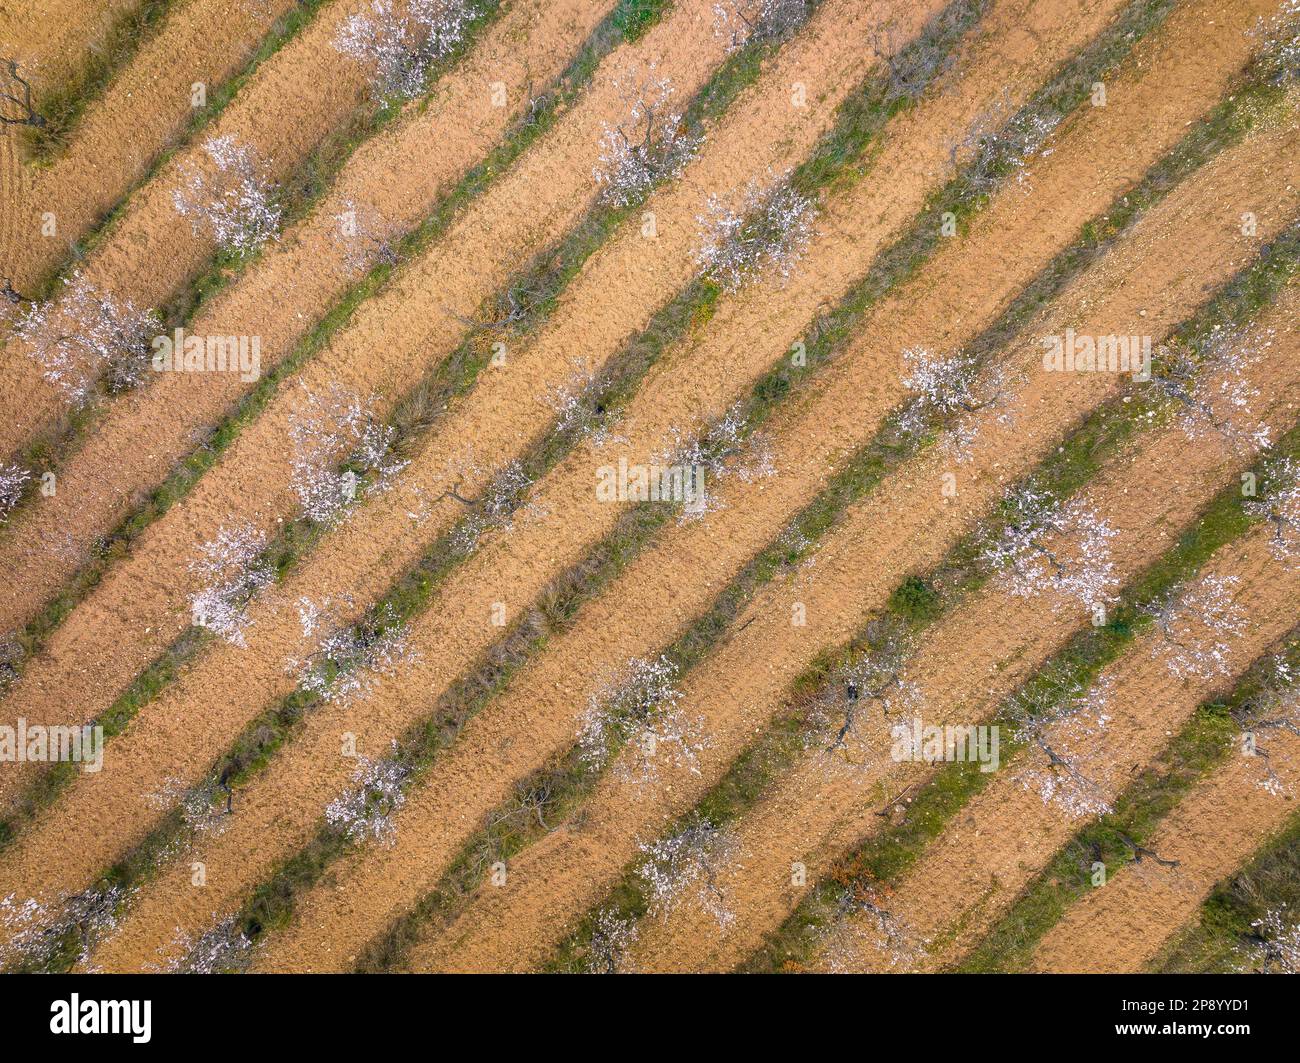 Aerial view of almond blossom fields in spring in a farm near the Canaletes river between Horta and Bot (Terra Alta, Tarragona, Catalonia, Spain) Stock Photo